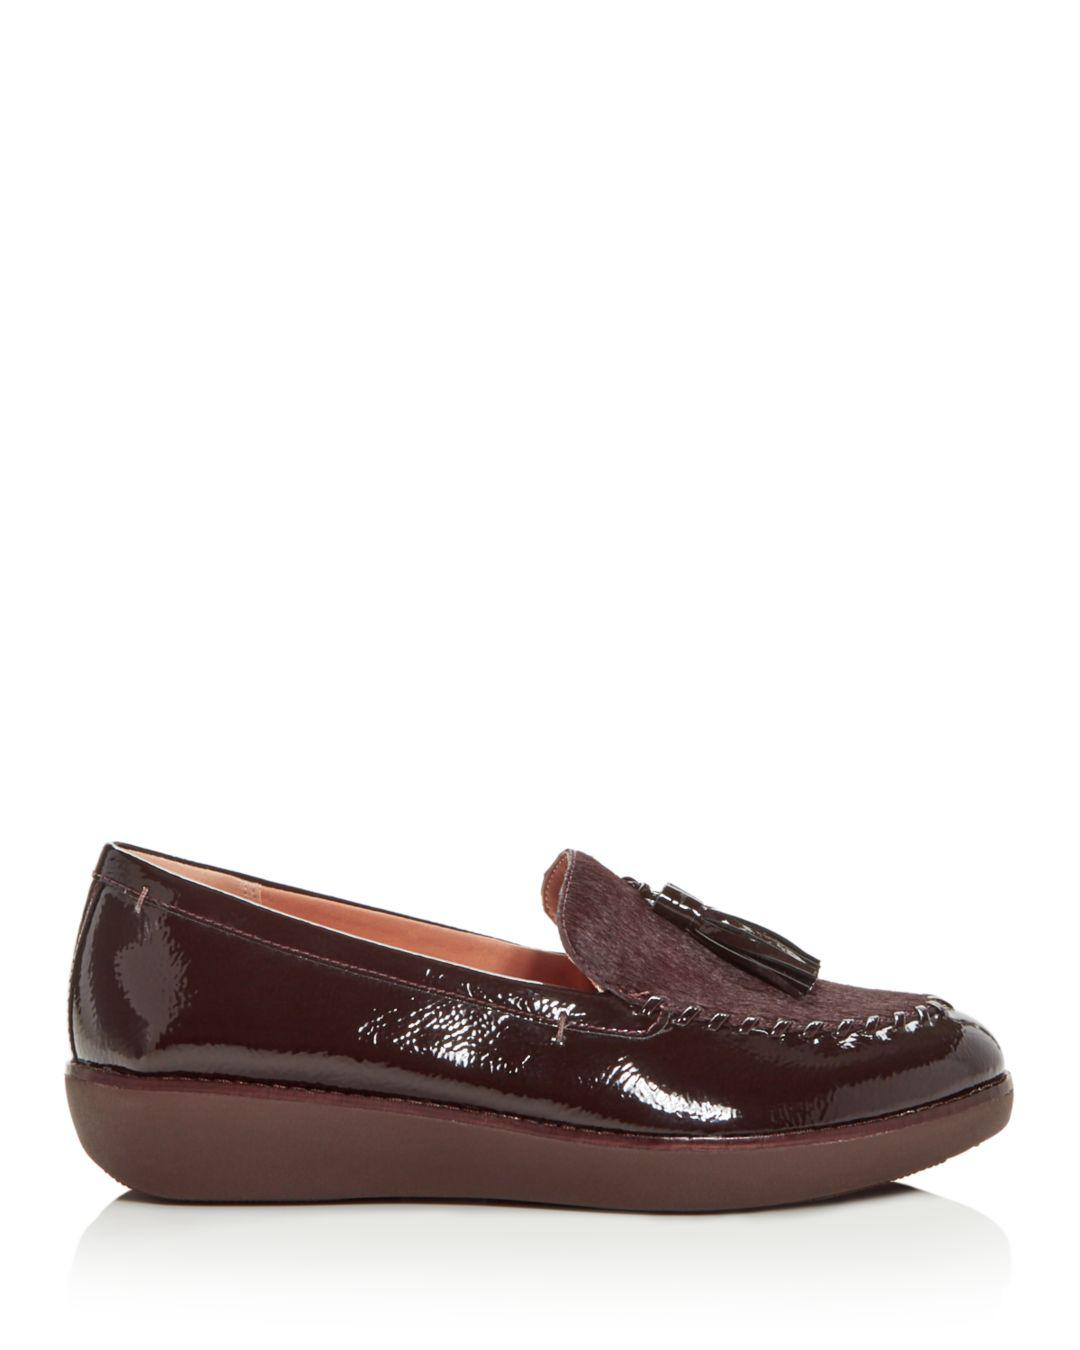 petrina patent moccasin loafers